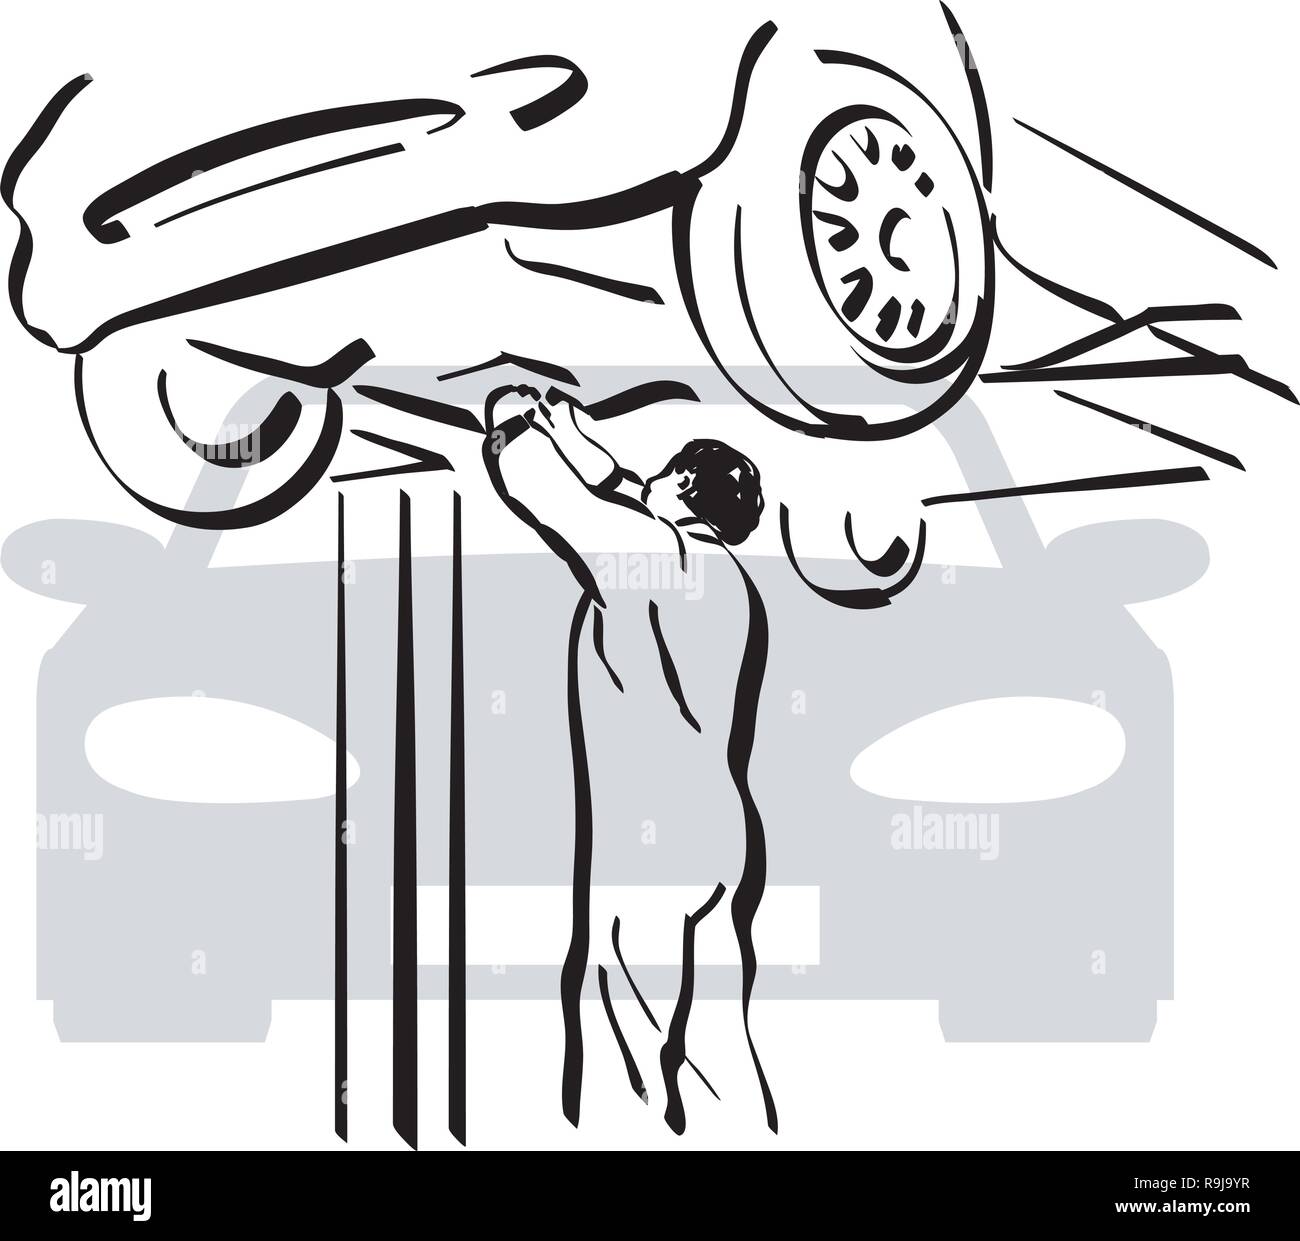 illustration of a mechanic at work in a car repair shop Stock Vector